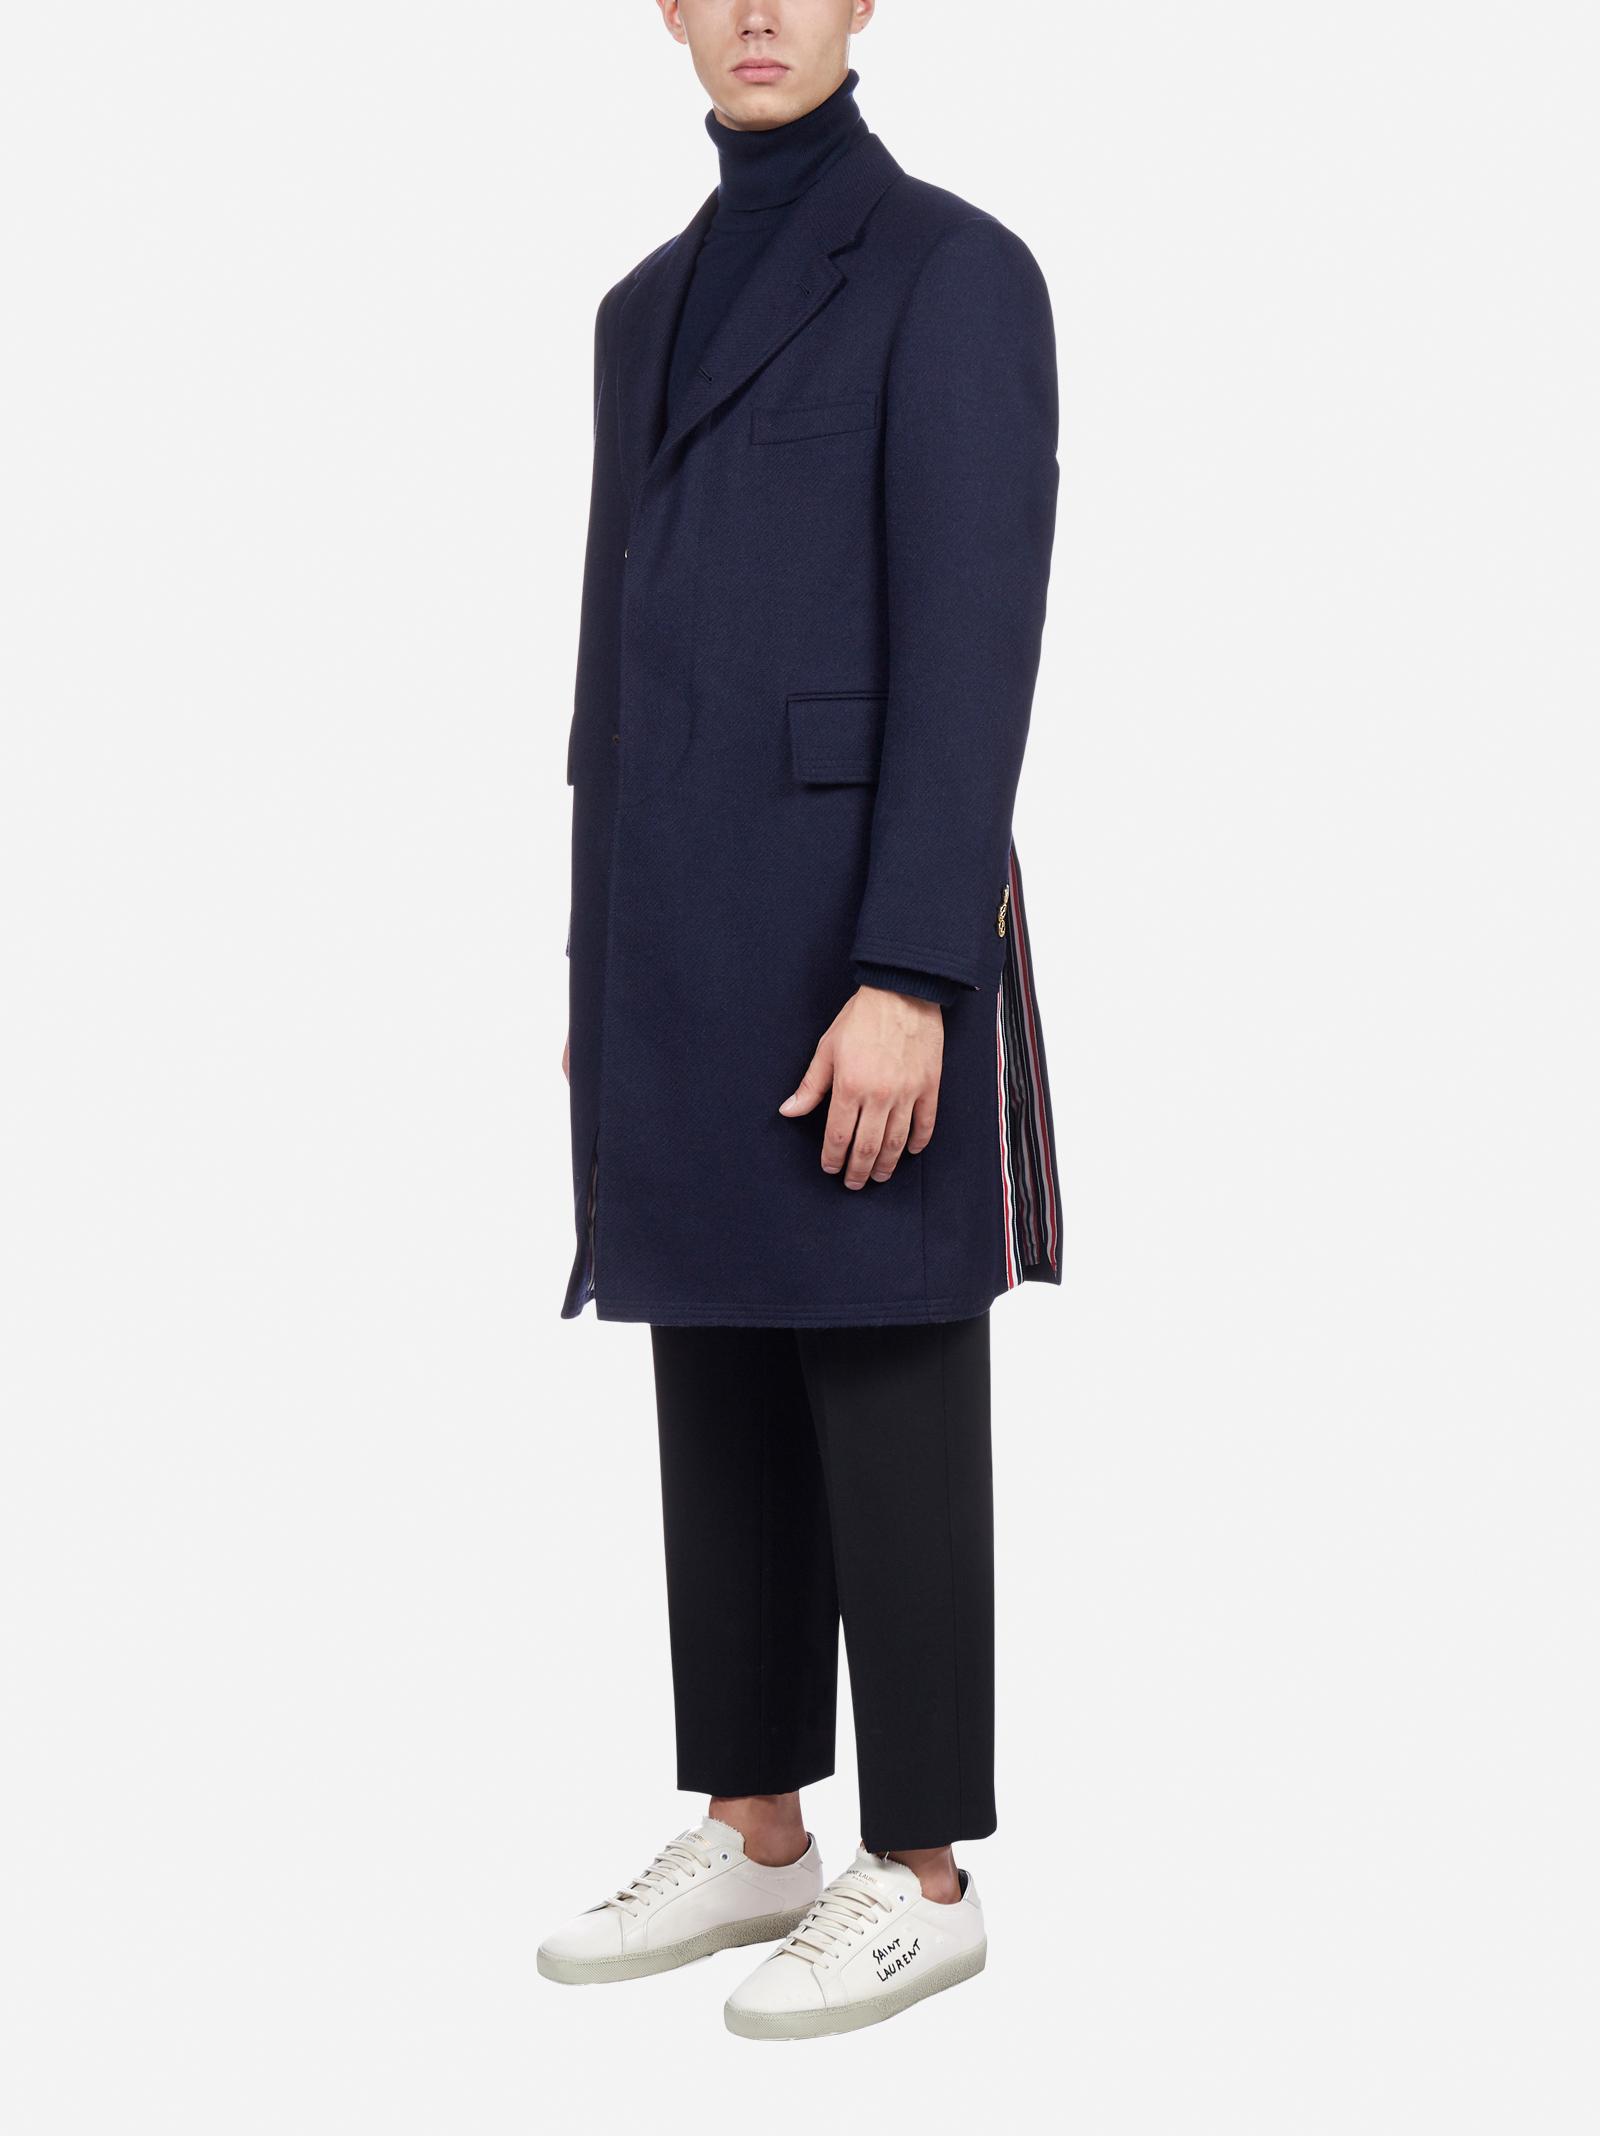 Thom Browne Wool Tailored Coat in Blue for Men - Lyst